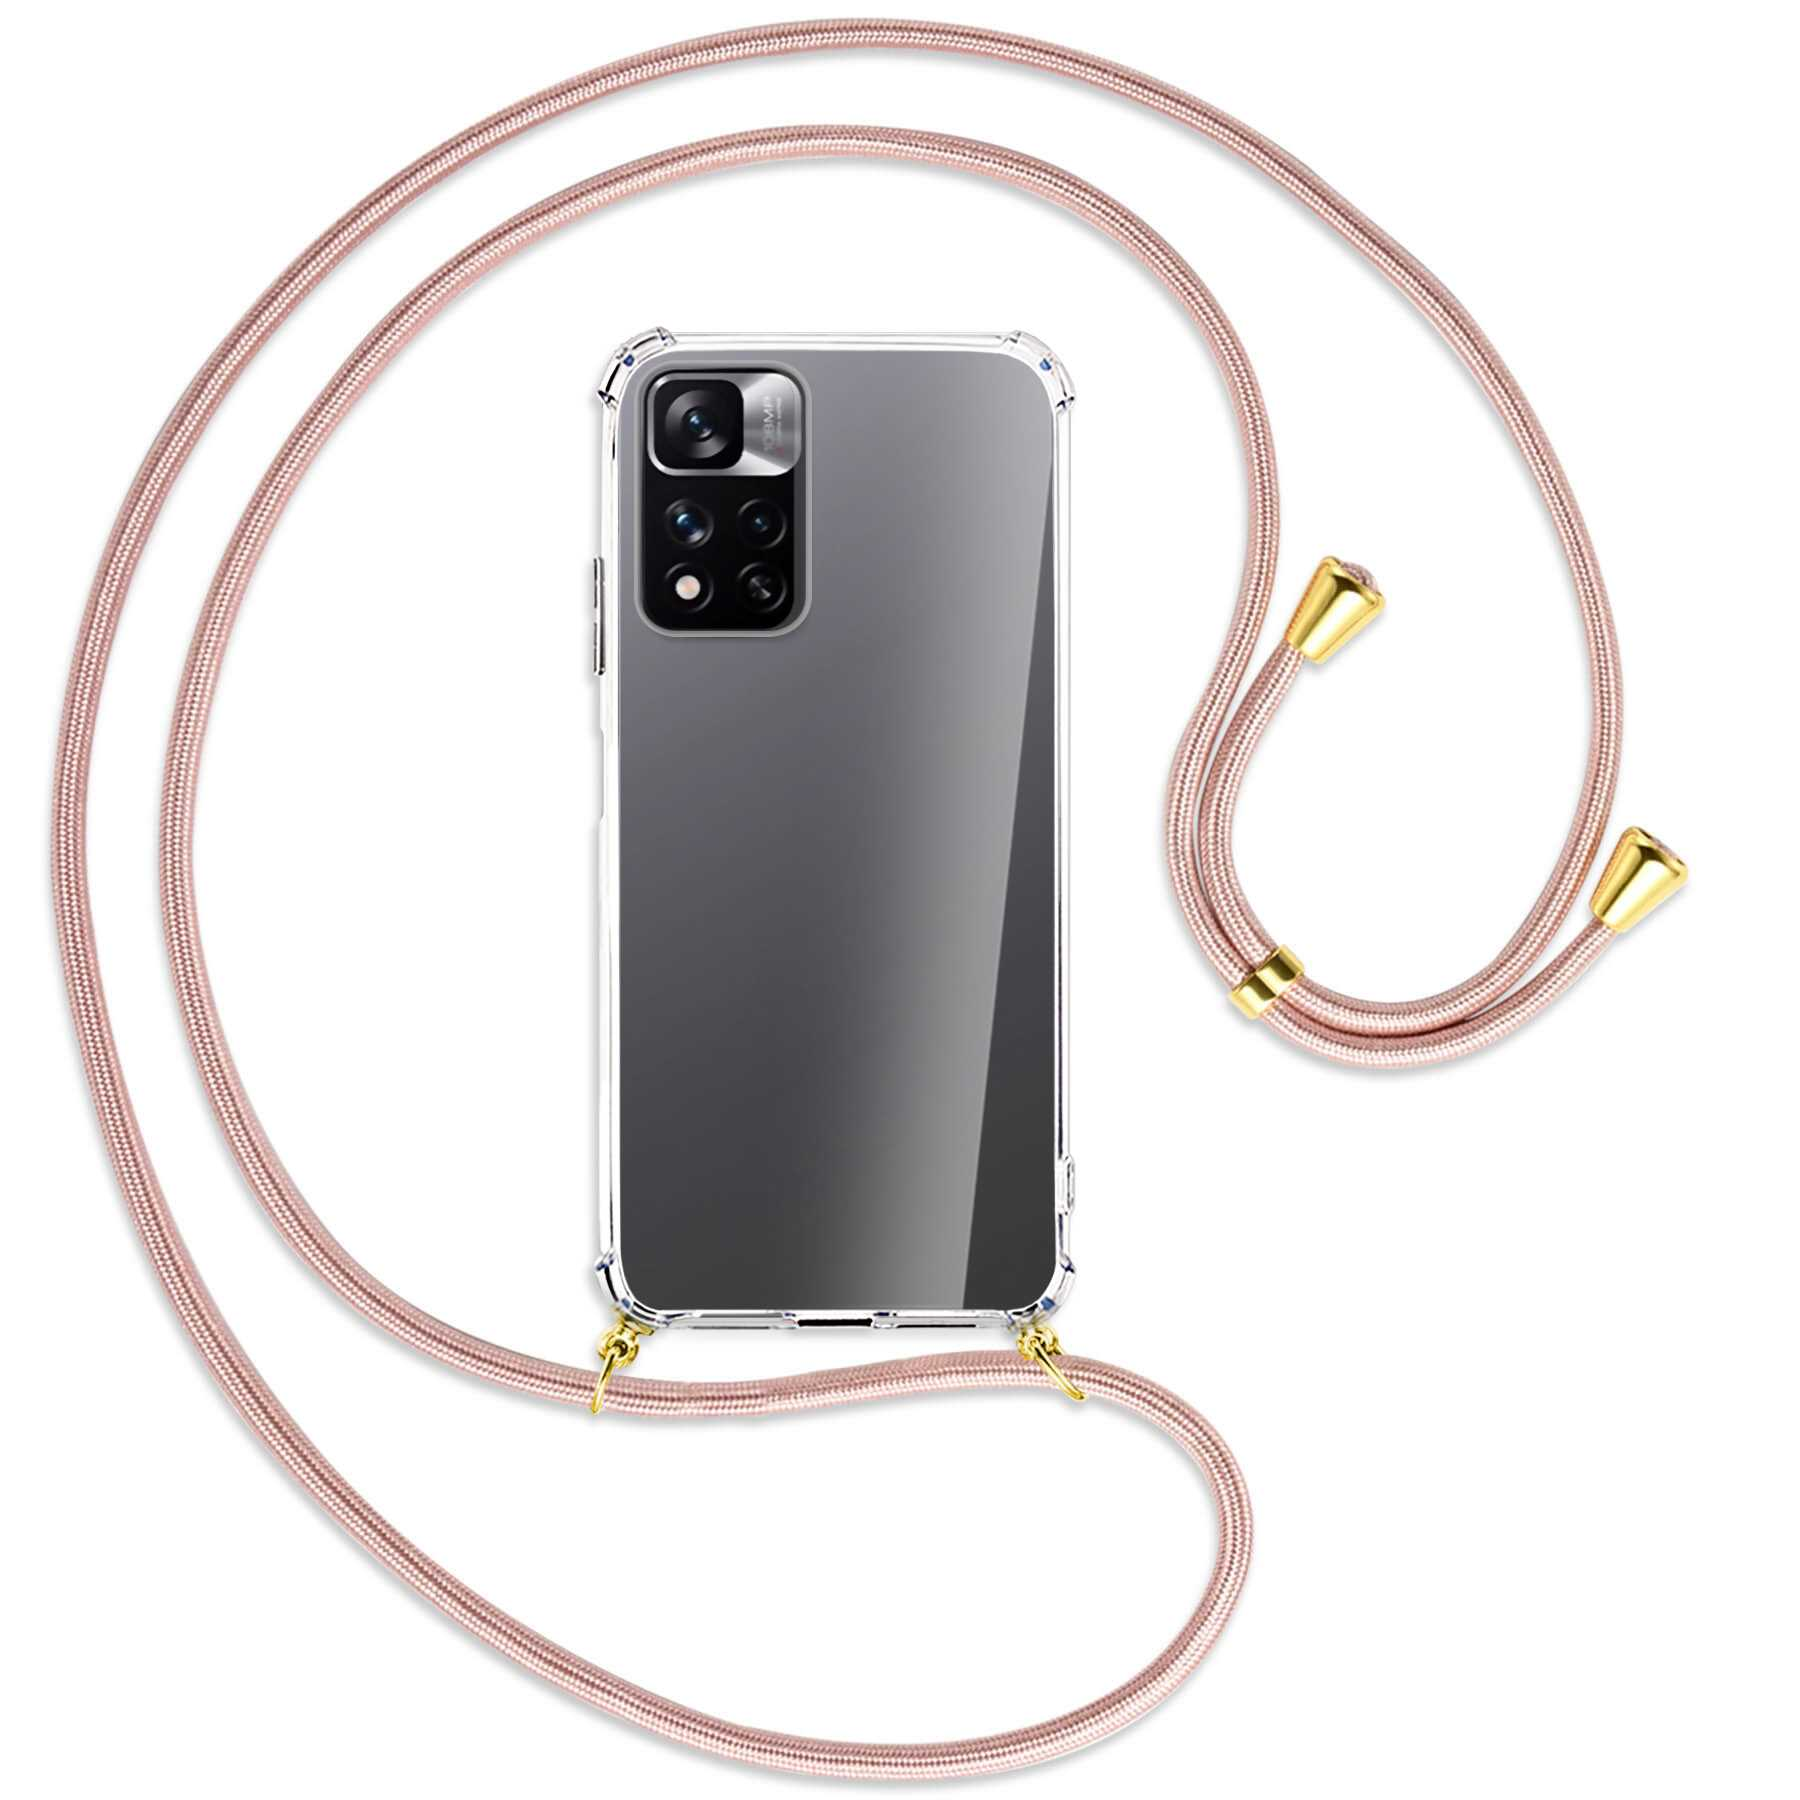 Gold Redmi Plus, Rosegold Note Backcover, mit 11 11 Note MORE MTB Umhänge-Hülle / ENERGY Redmi Kordel, Pro+, Xiaomi, Pro